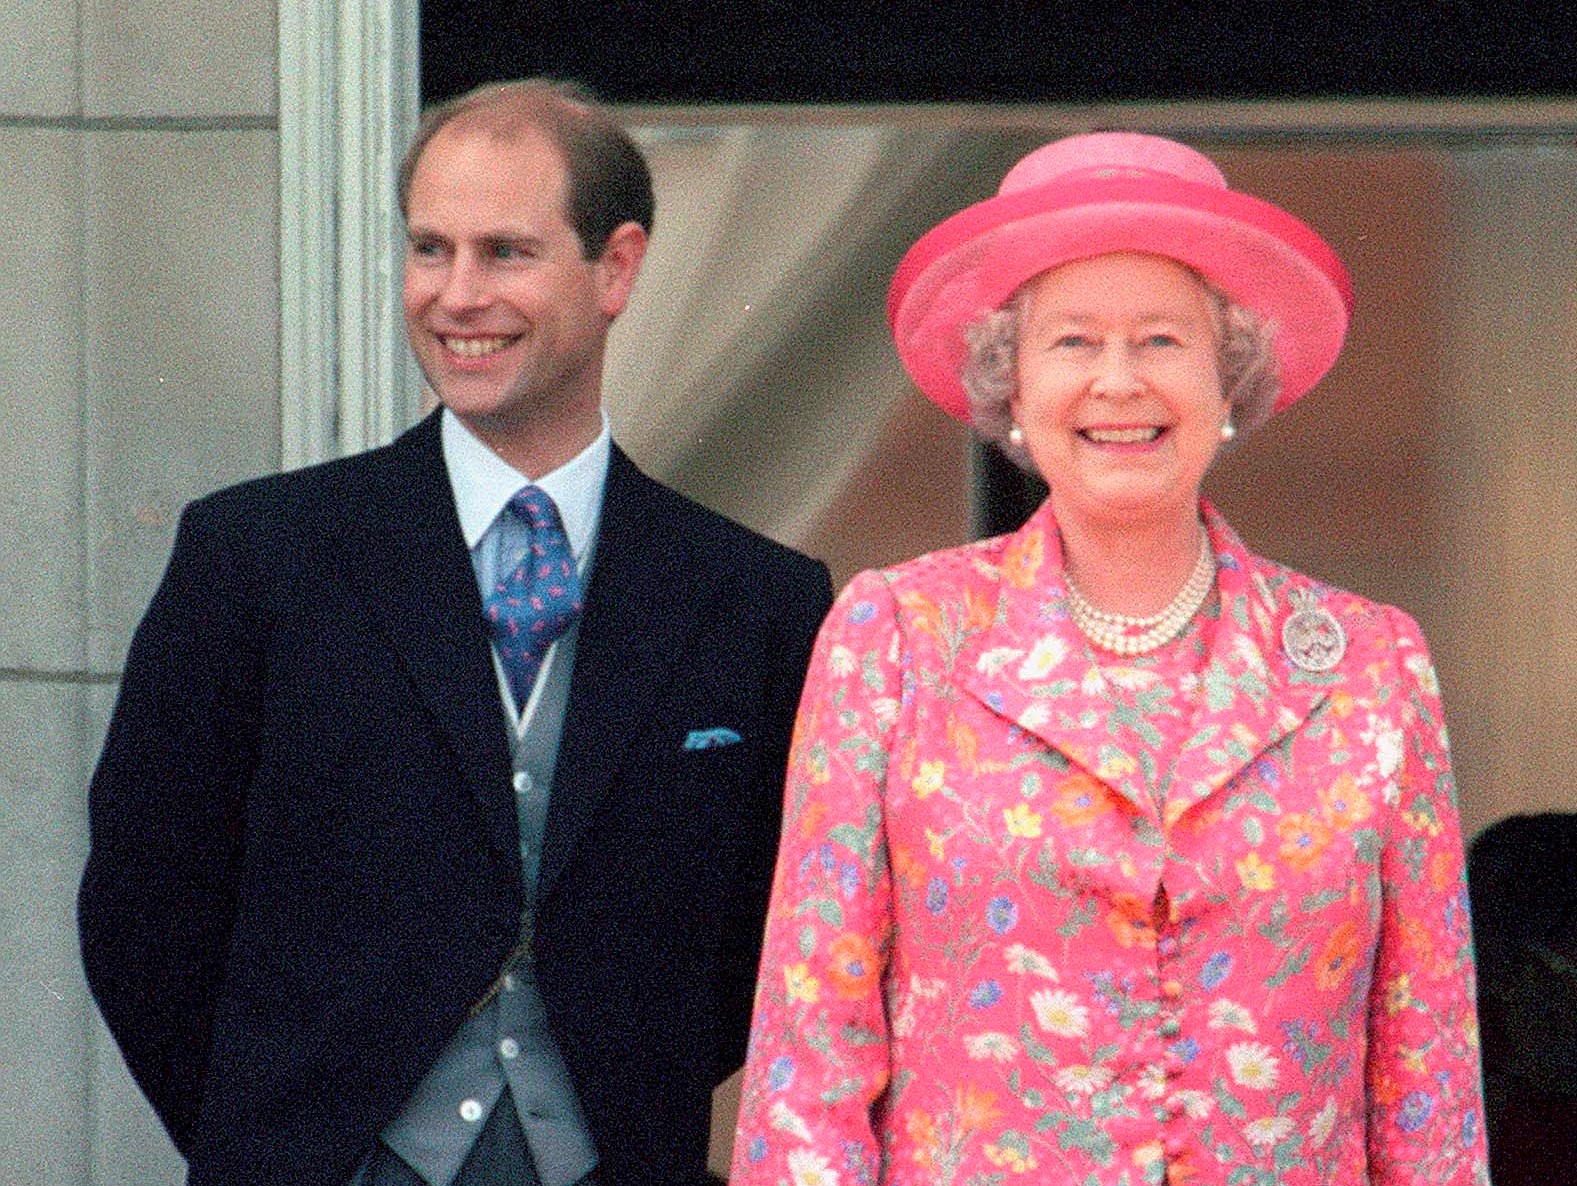 Prince Edward with his mother Queen Elizabeth II on the balcony of Buckingham Palace